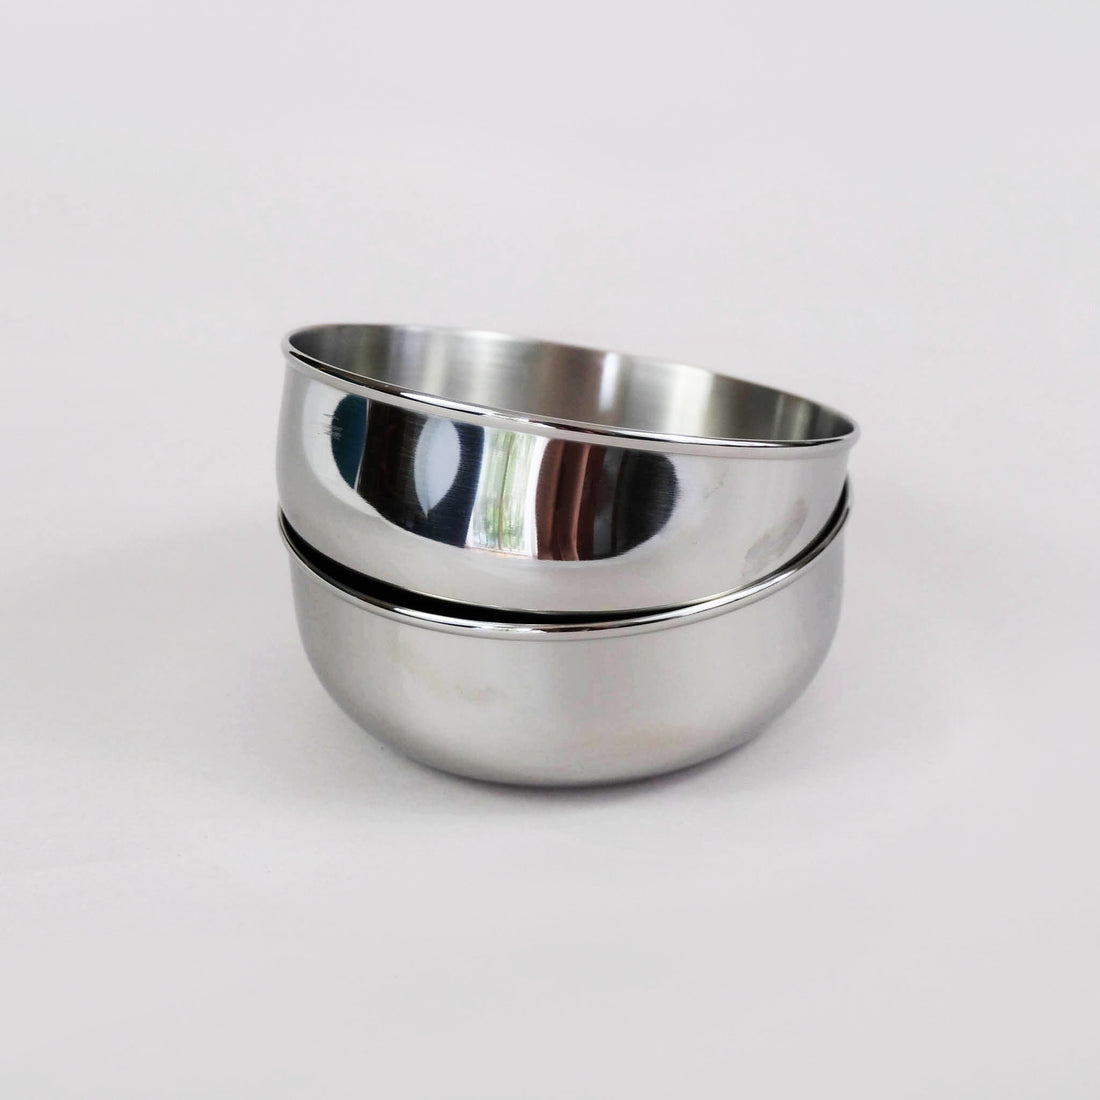 Stainless Steel Bowls - Set of 2